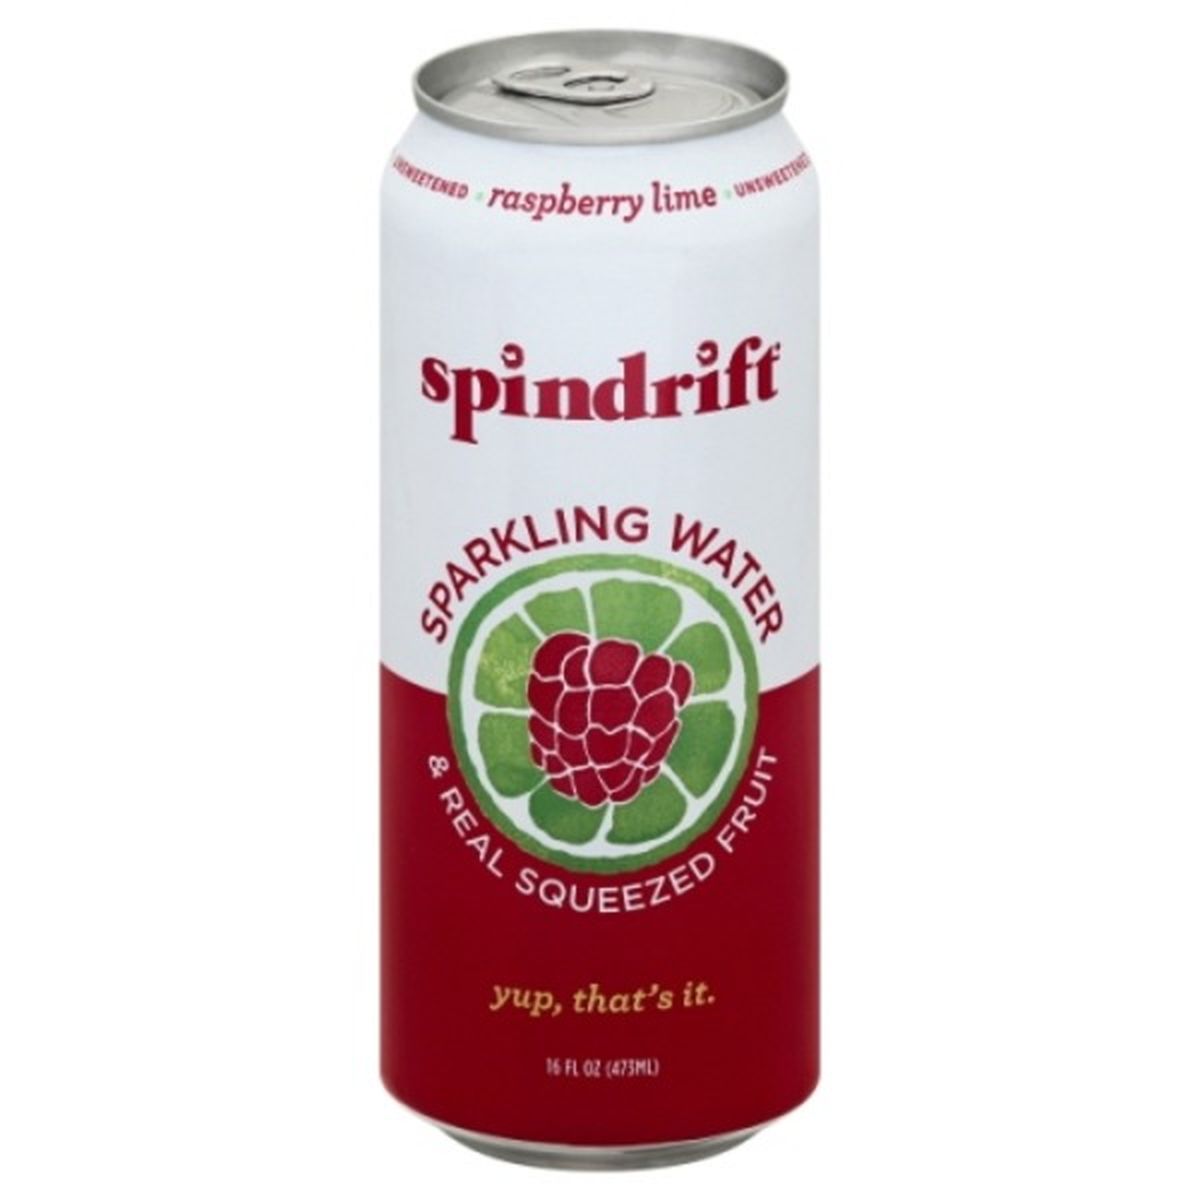 Calories in Spindrift Sparkling Water, Raspberry Lime